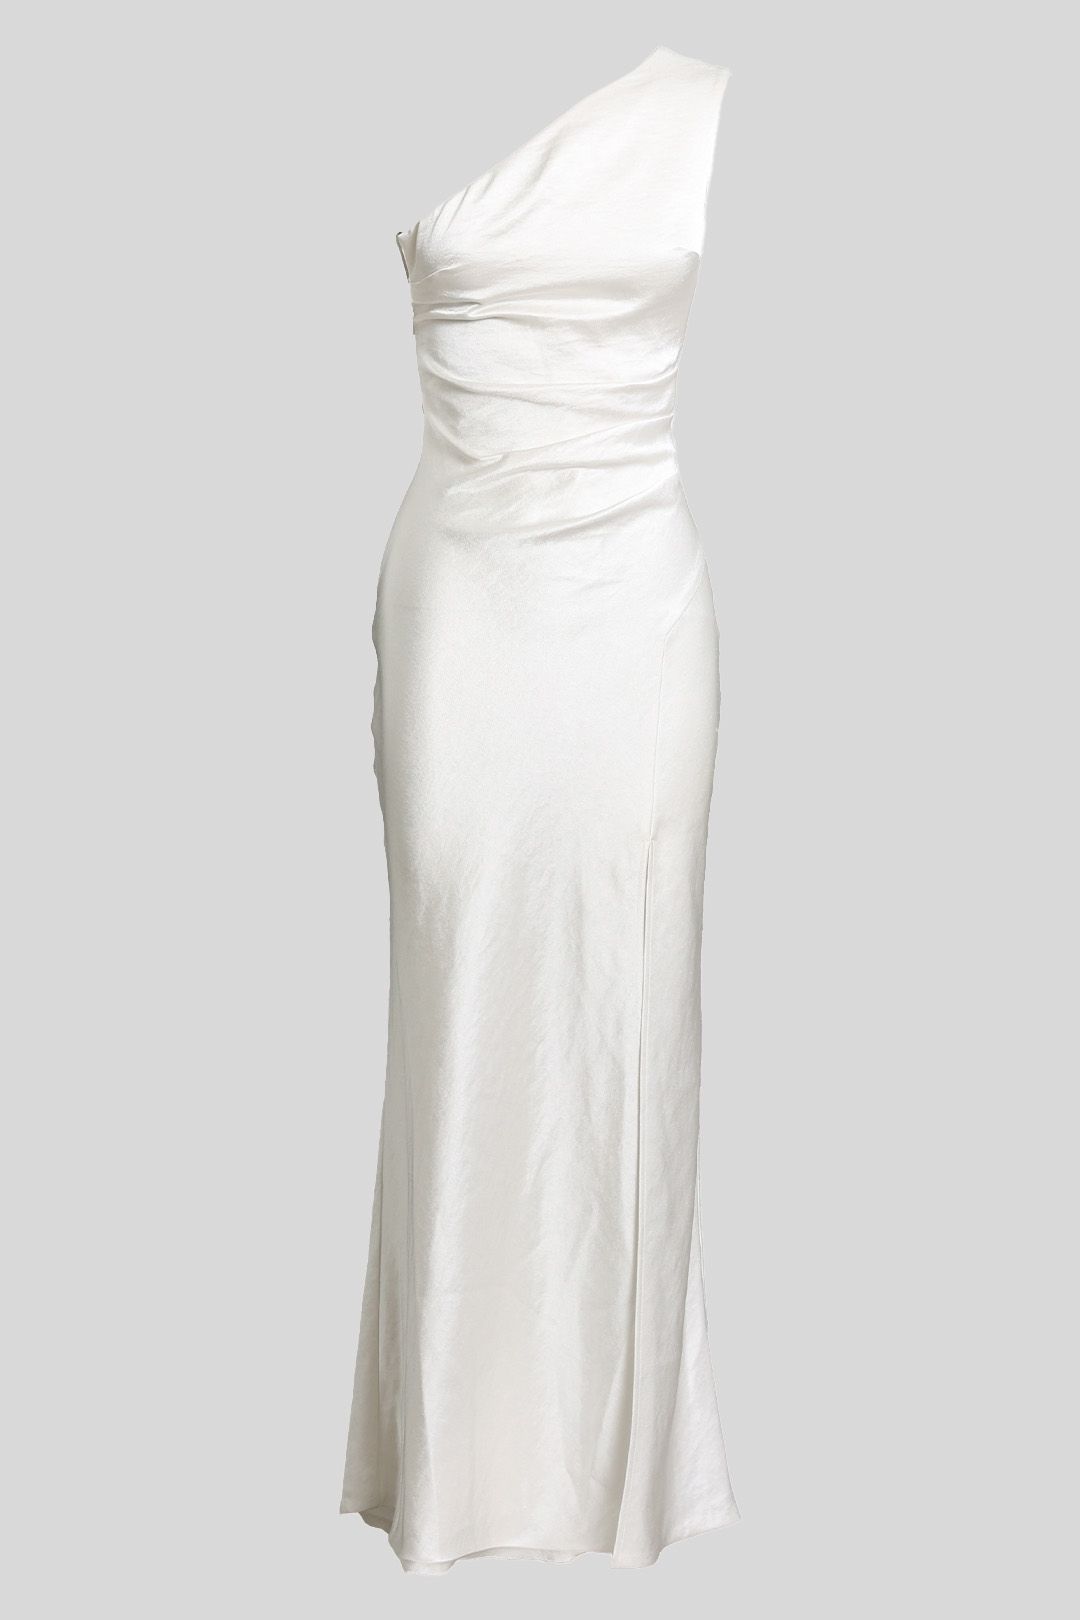 Bec and Bridge - The Dreamer Asym Maxi Dress in Ivory